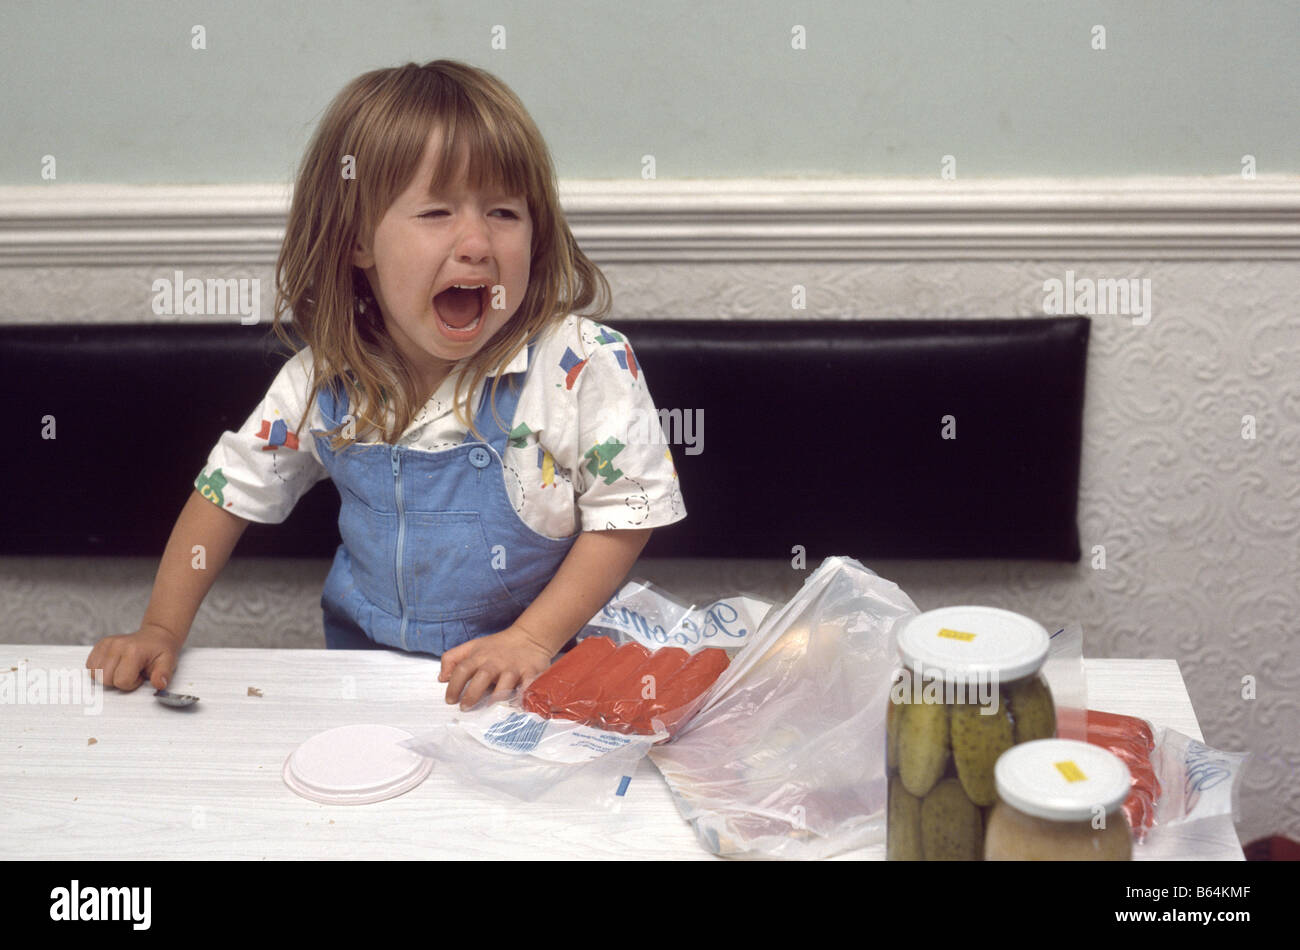 young girl crying at the kitchen table Stock Photo